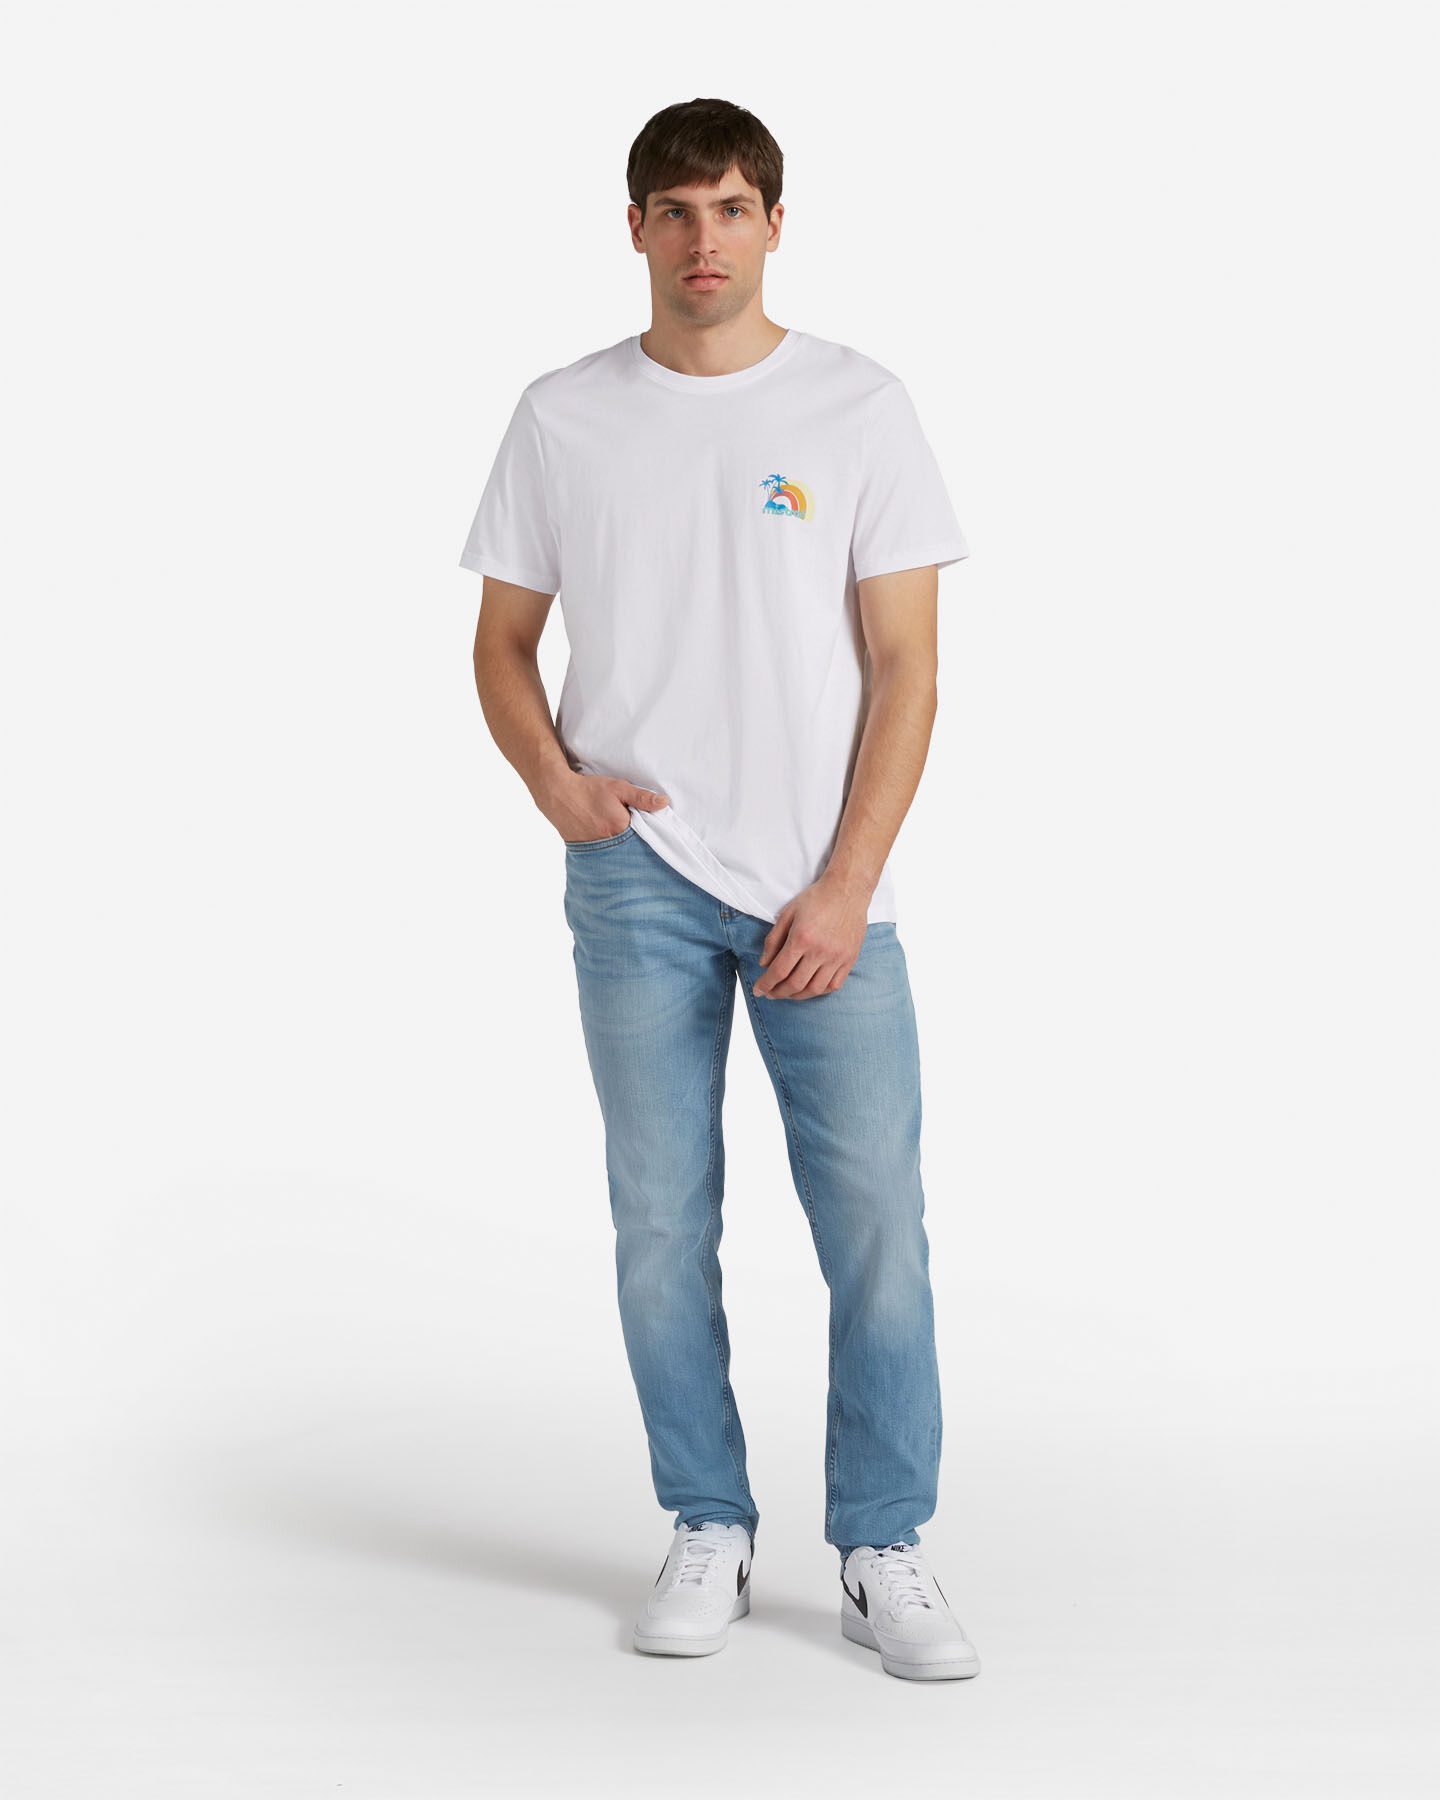  T-Shirt MISTRAL RAINBOW M S4130289|BIANCO|S scatto 1